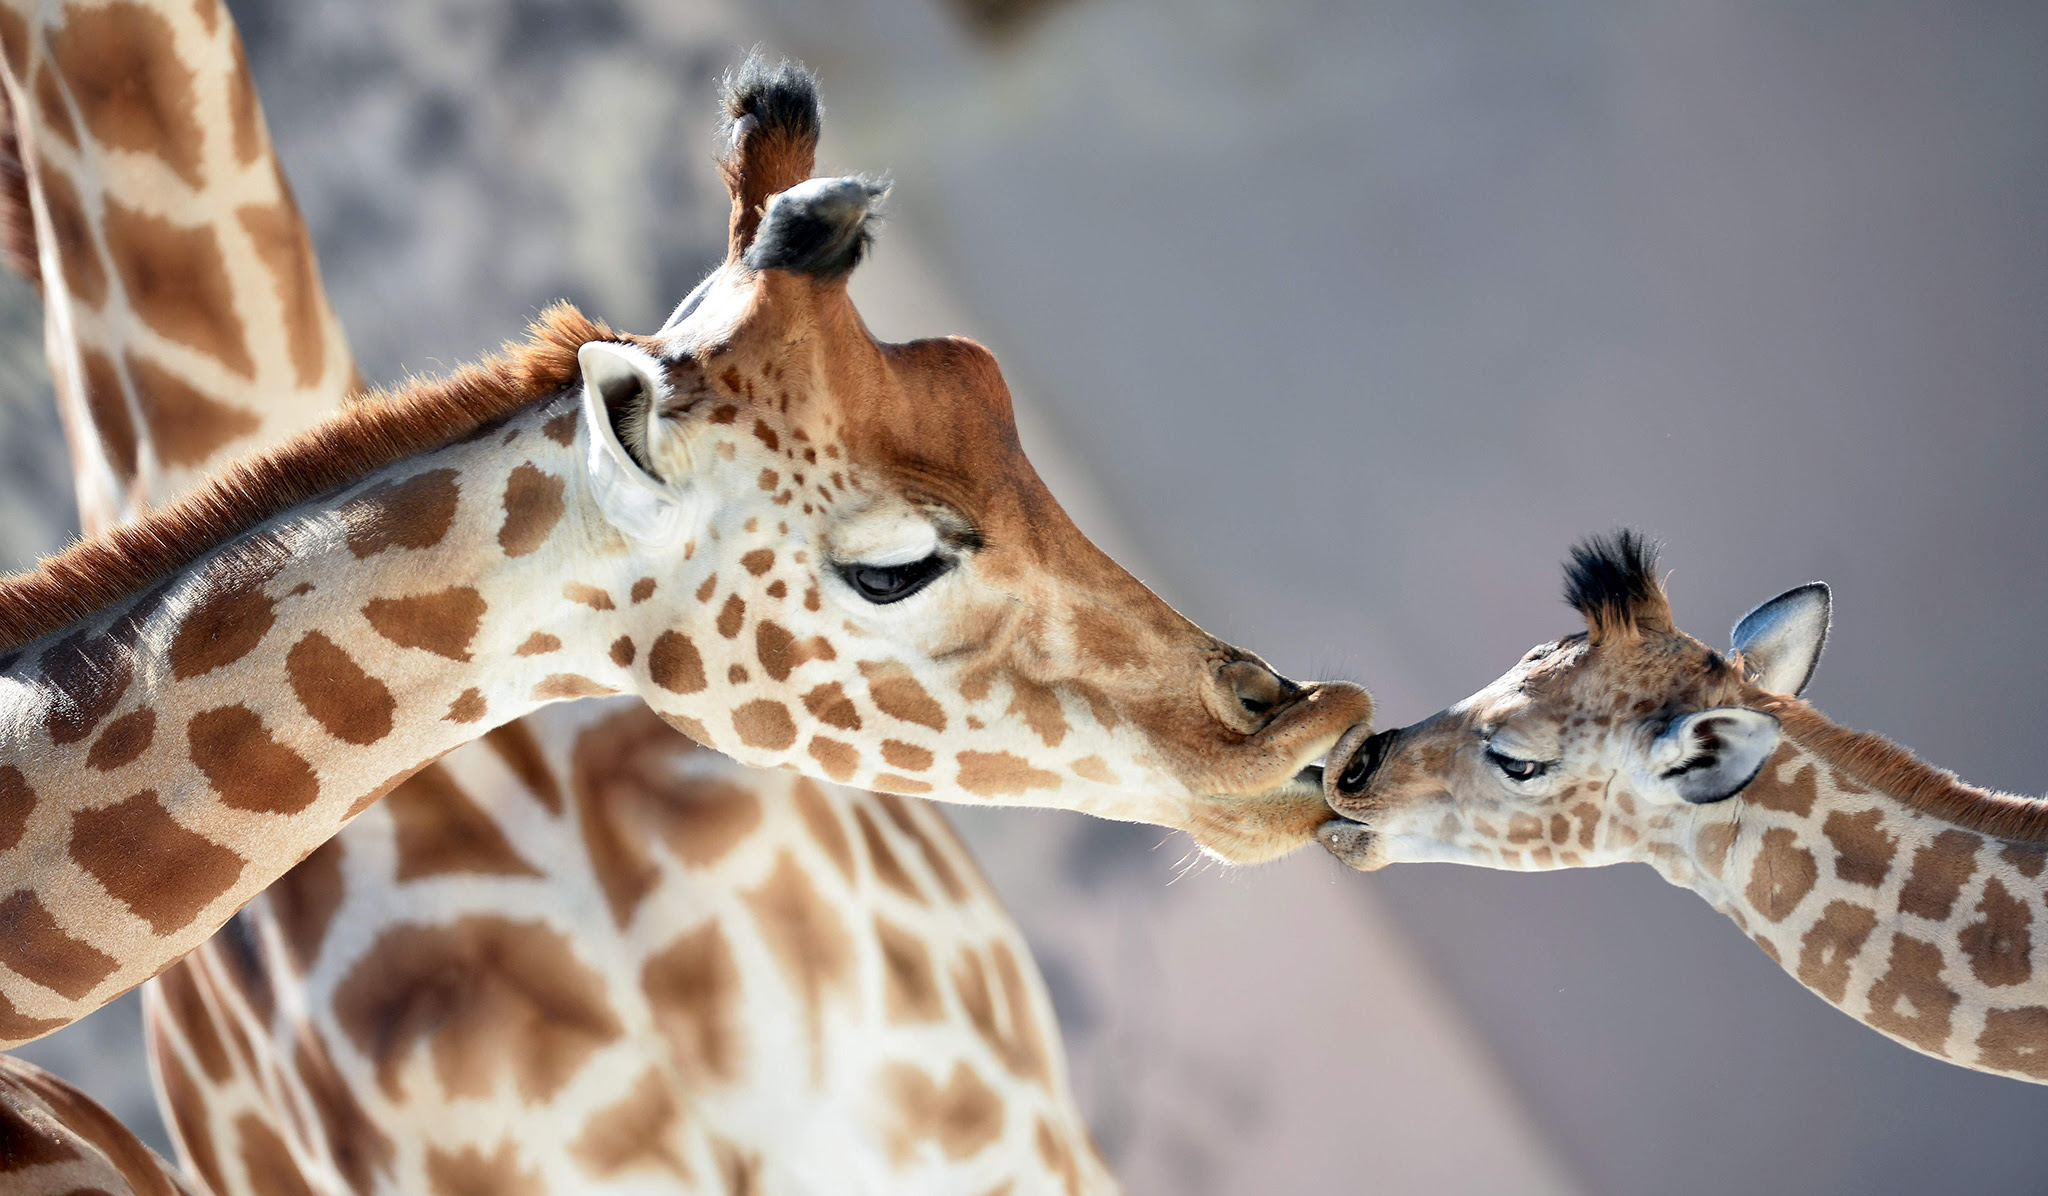 Baby giraffe of Niger (Giraffa Camelopardalis) "Kenai" (R), born on August 25, 2016, kisses his mother "Dioni" on August 31, 2016 at the zoo of La Fleche, northwestern France. / AFP PHOTO / JEAN-FRANCOIS MONIERJEAN-FRANCOIS MONIER/AFP/Getty Images